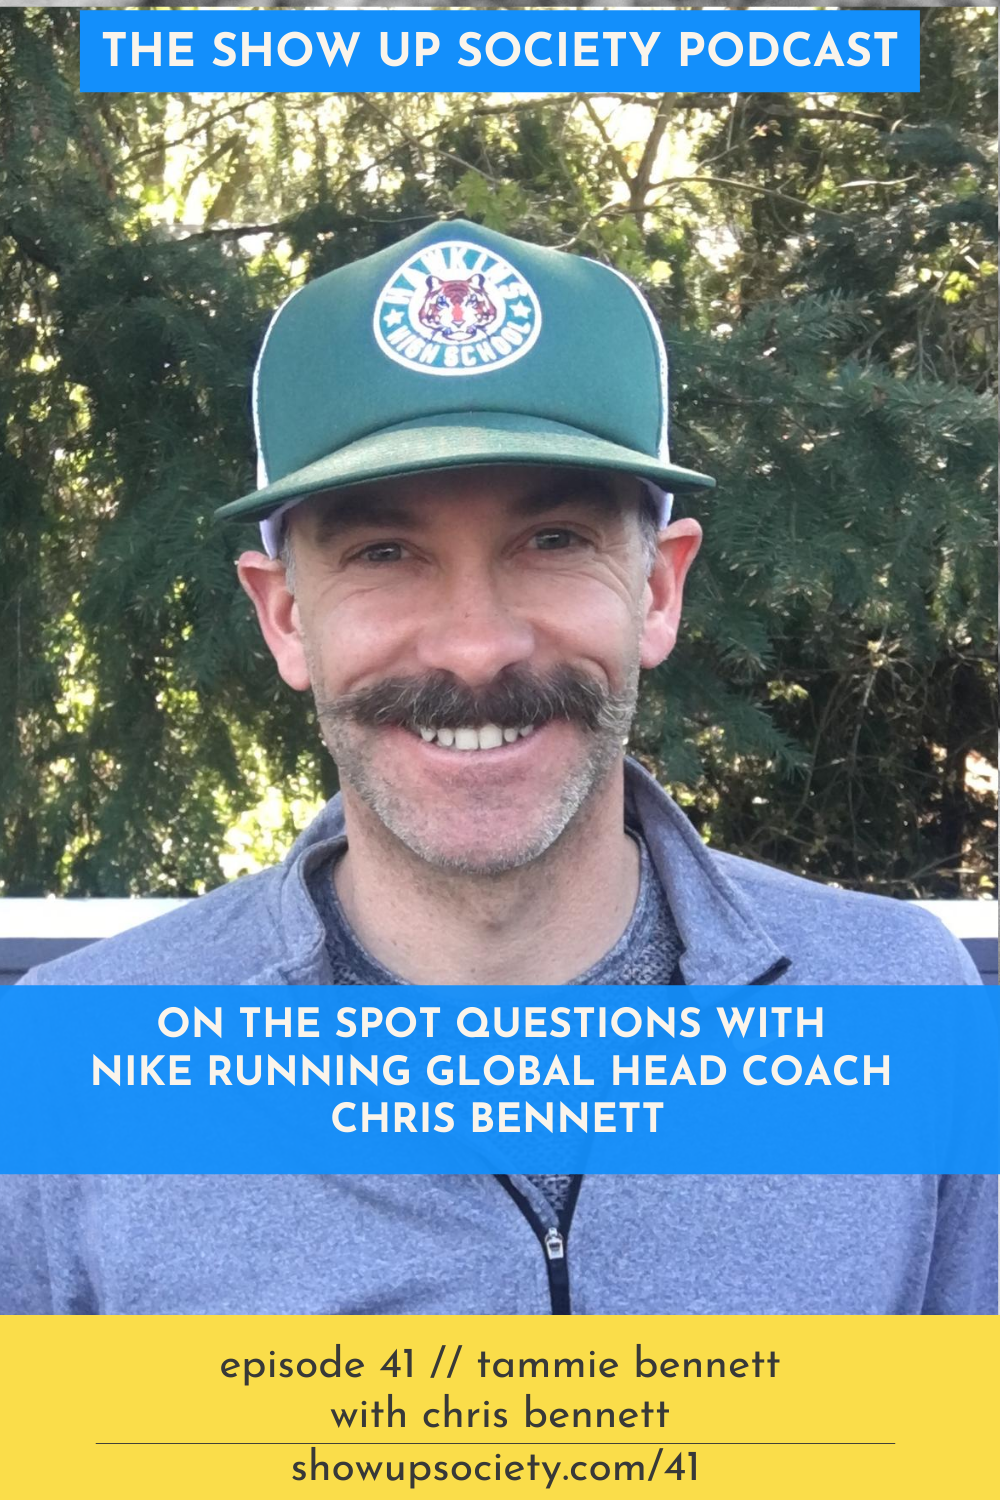 Part 2 : On the Spot with Coach Chris Bennett - episode 41 — tammie bennett  // the SHOW UP society